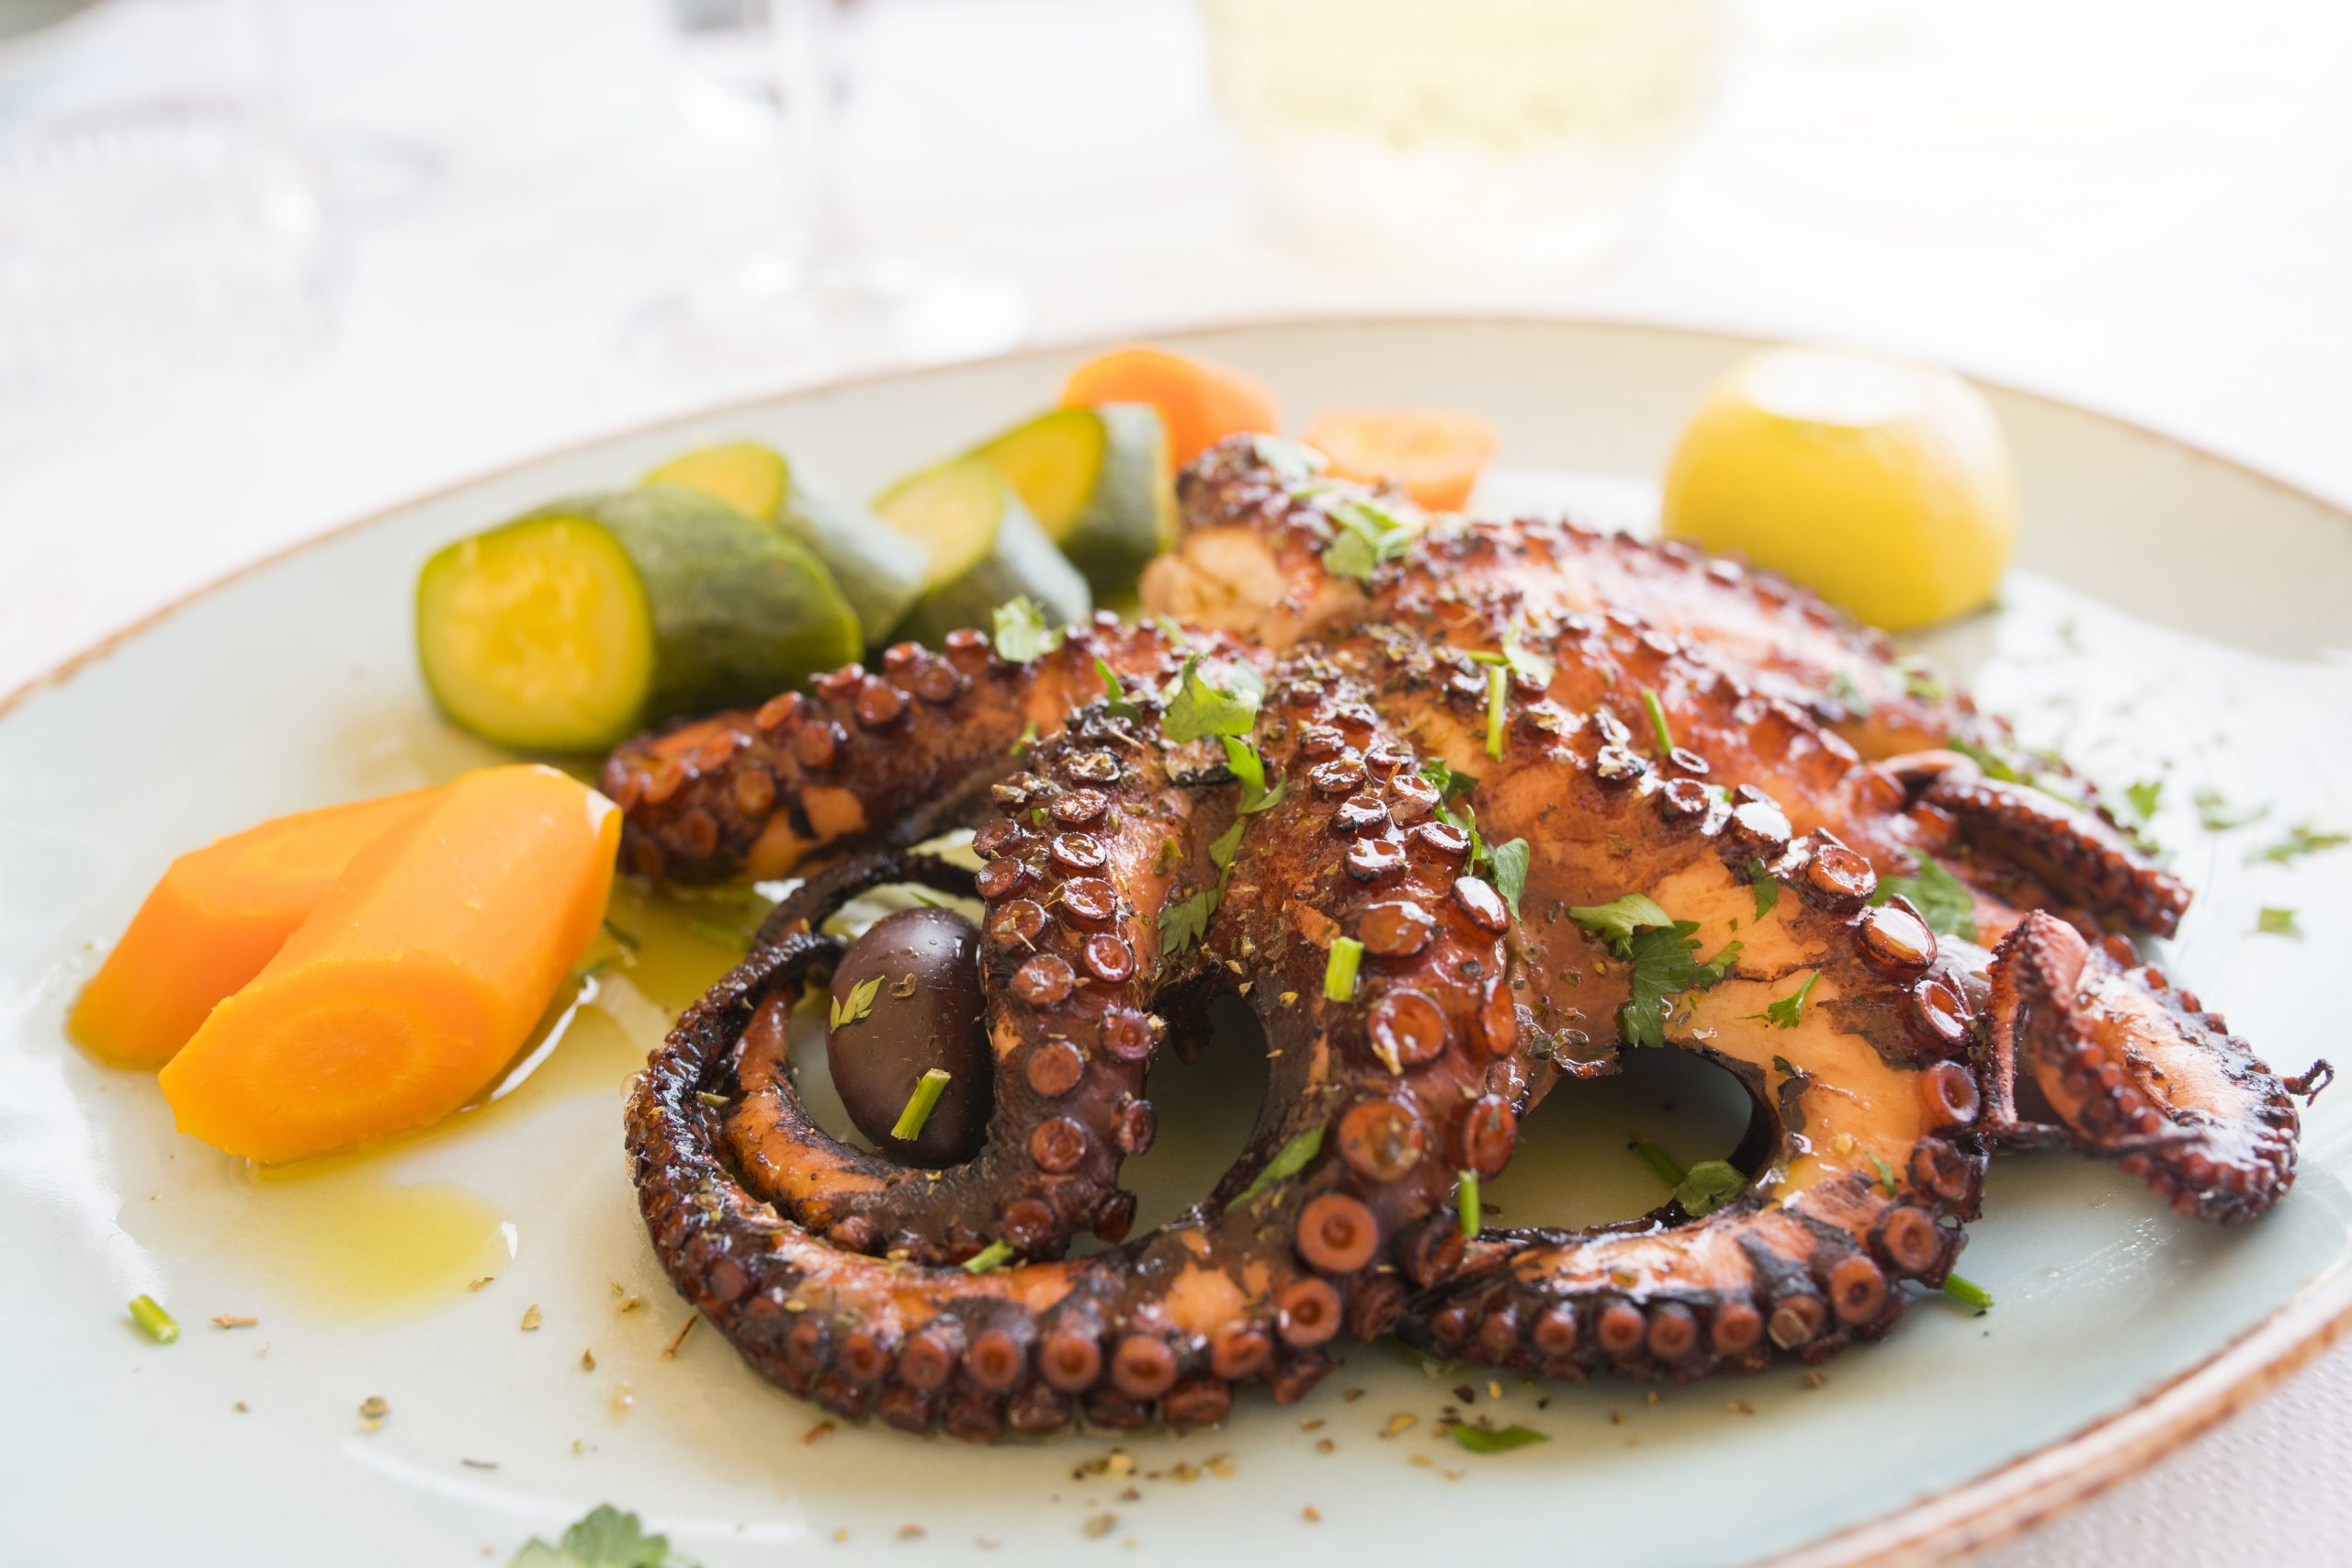 Authentic Greek Specialties, Seafood